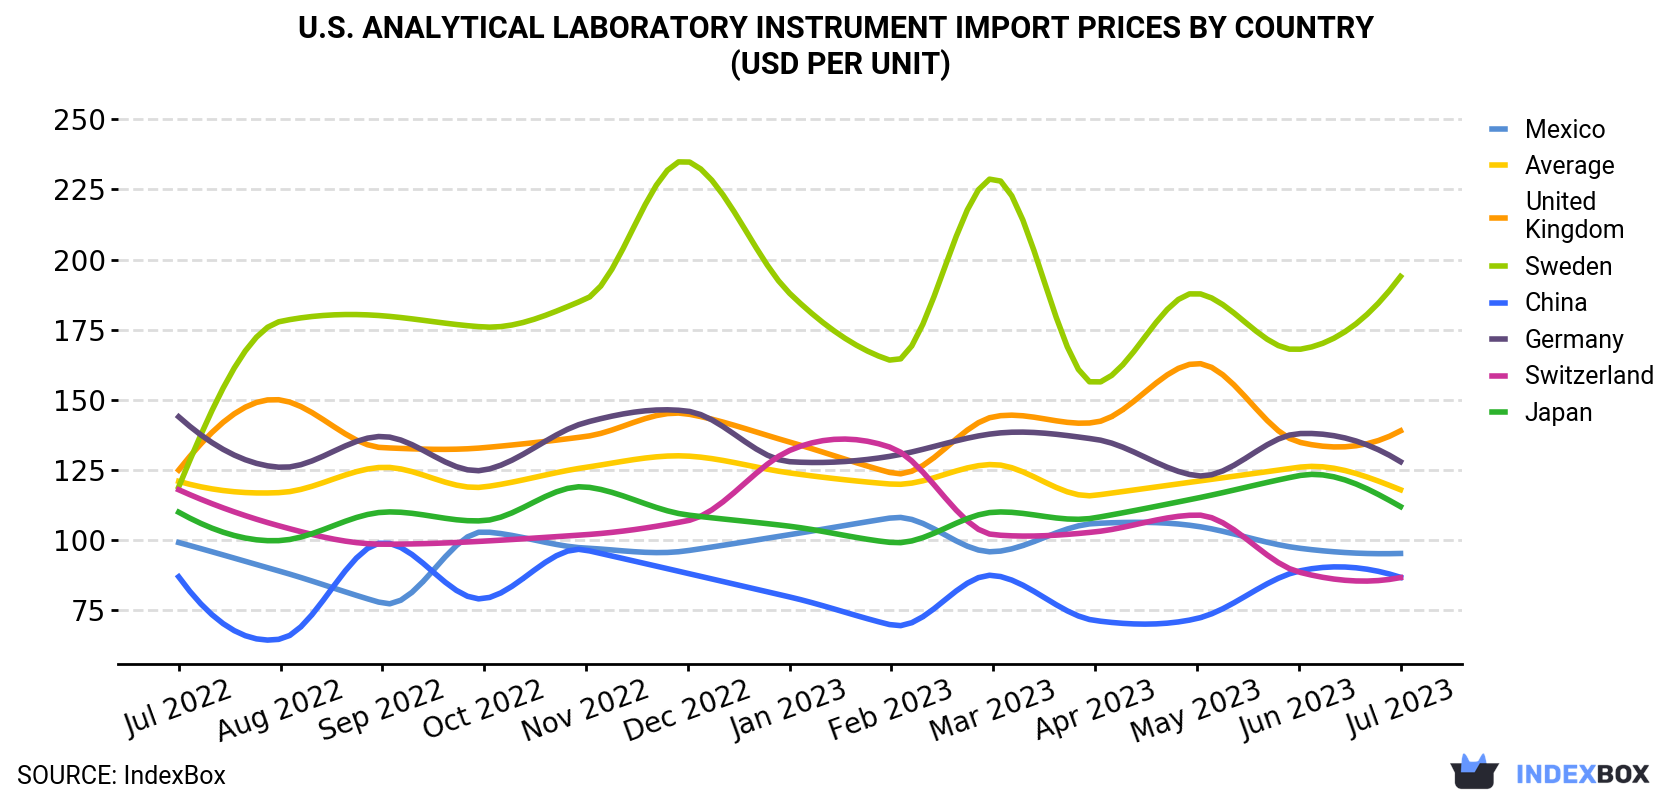 U.S. Analytical Laboratory Instrument Import Prices By Country (USD Per Unit)